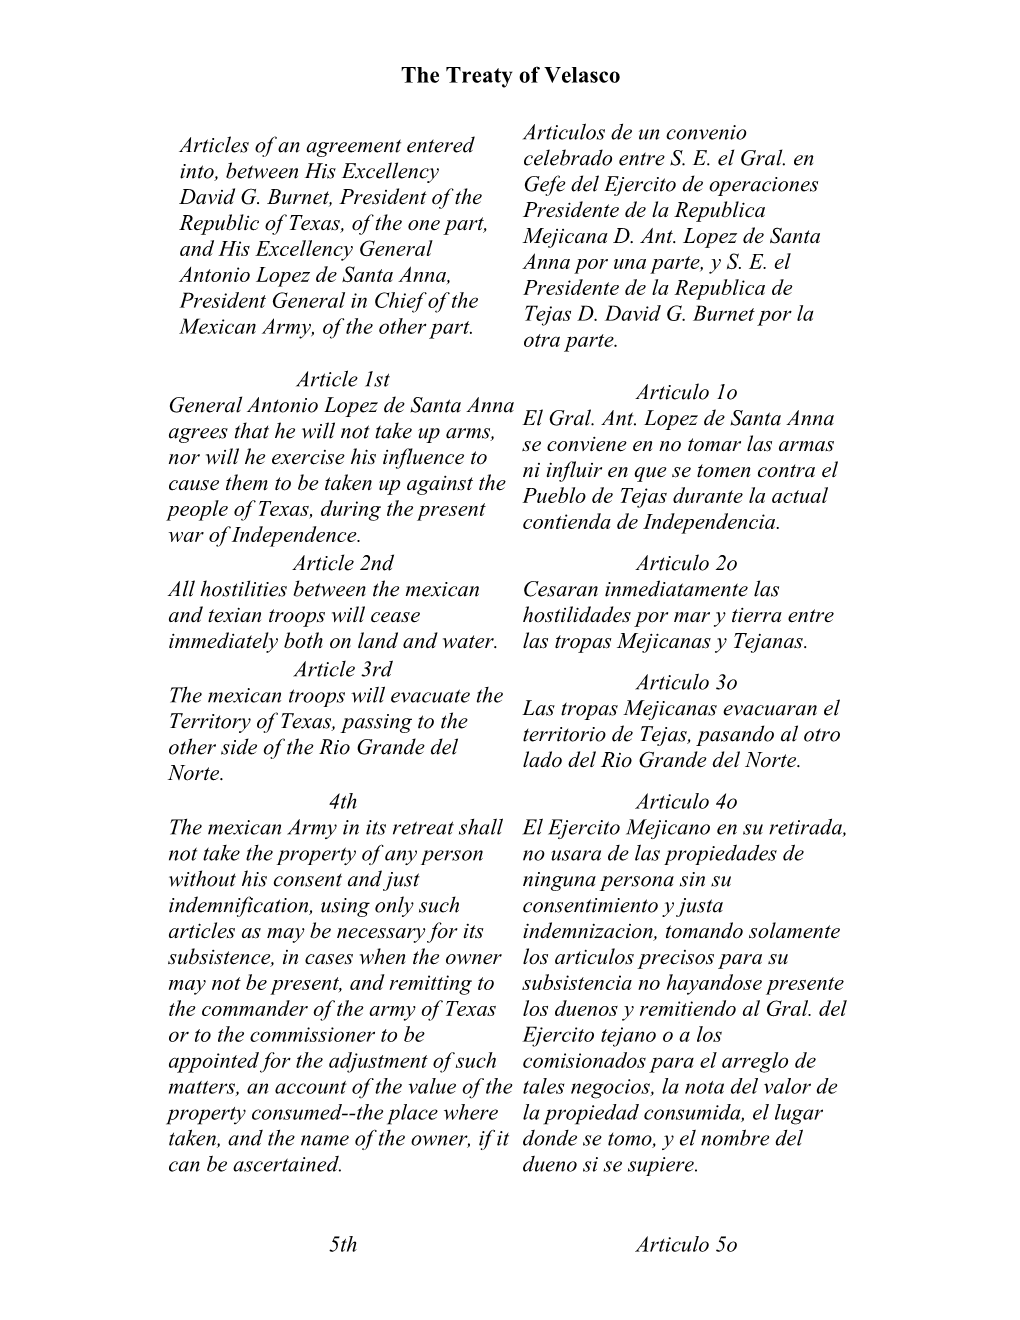 Articles of an Agreement Entered Into, Between His Excellency David G